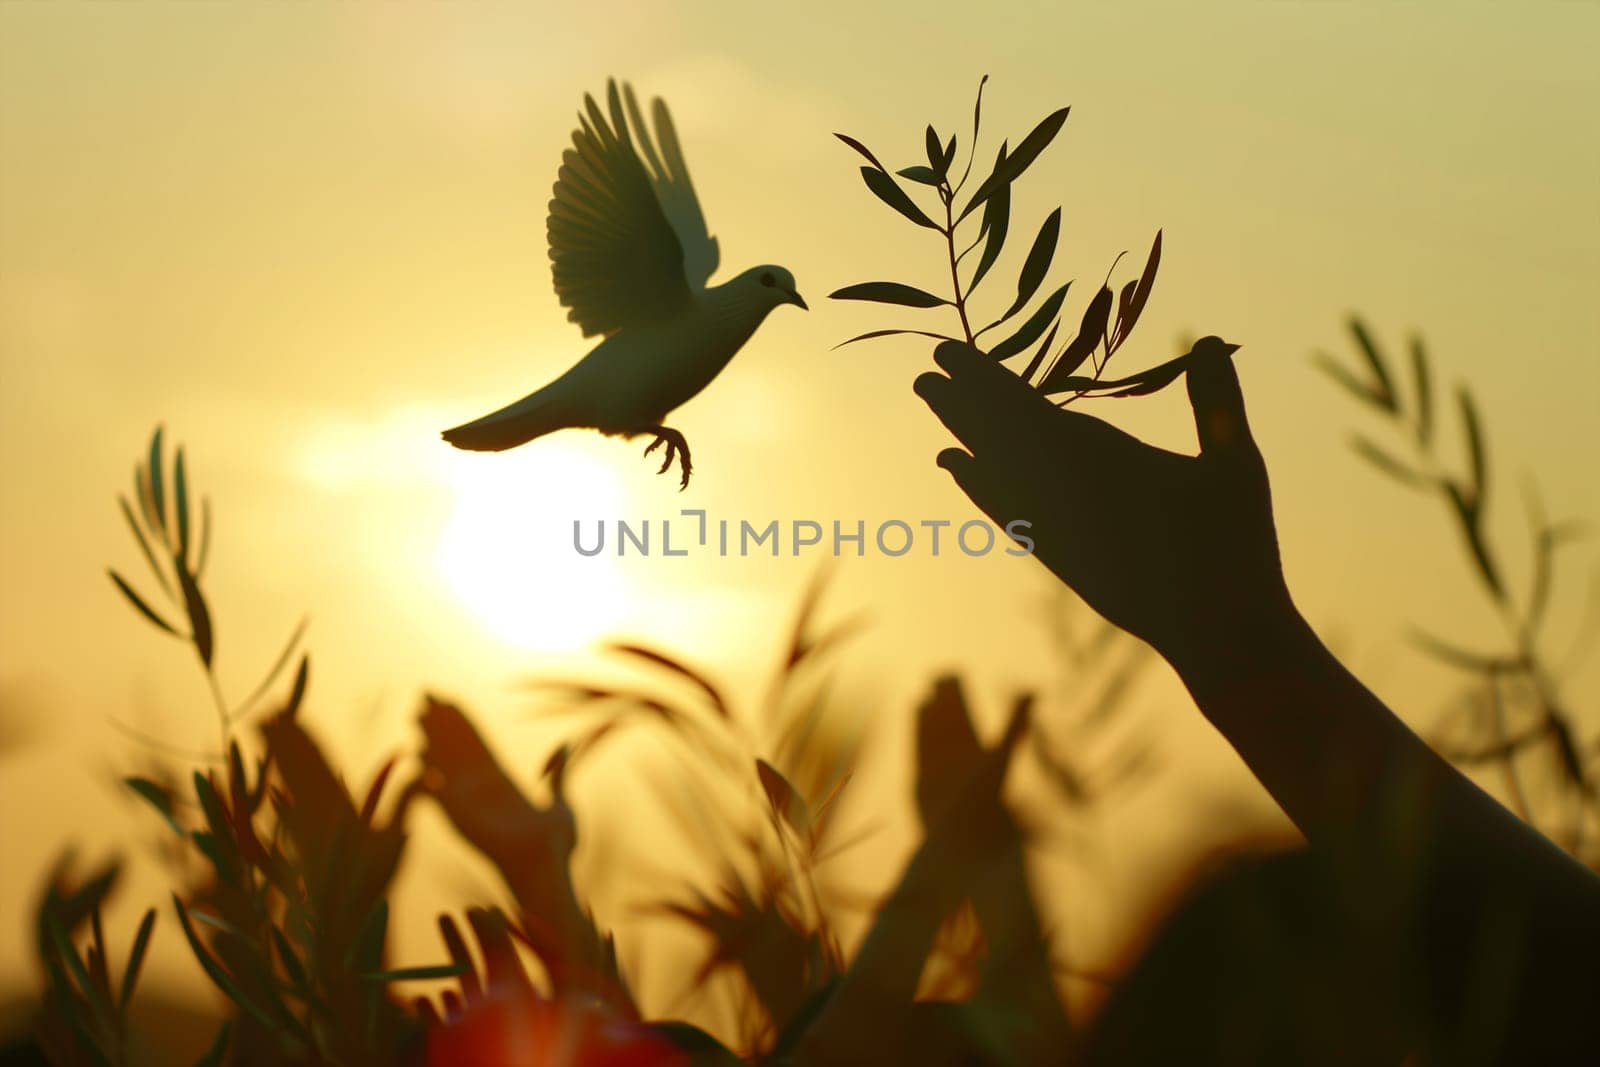 Bird Flying Over Persons Hand With Sun in Background by Sd28DimoN_1976